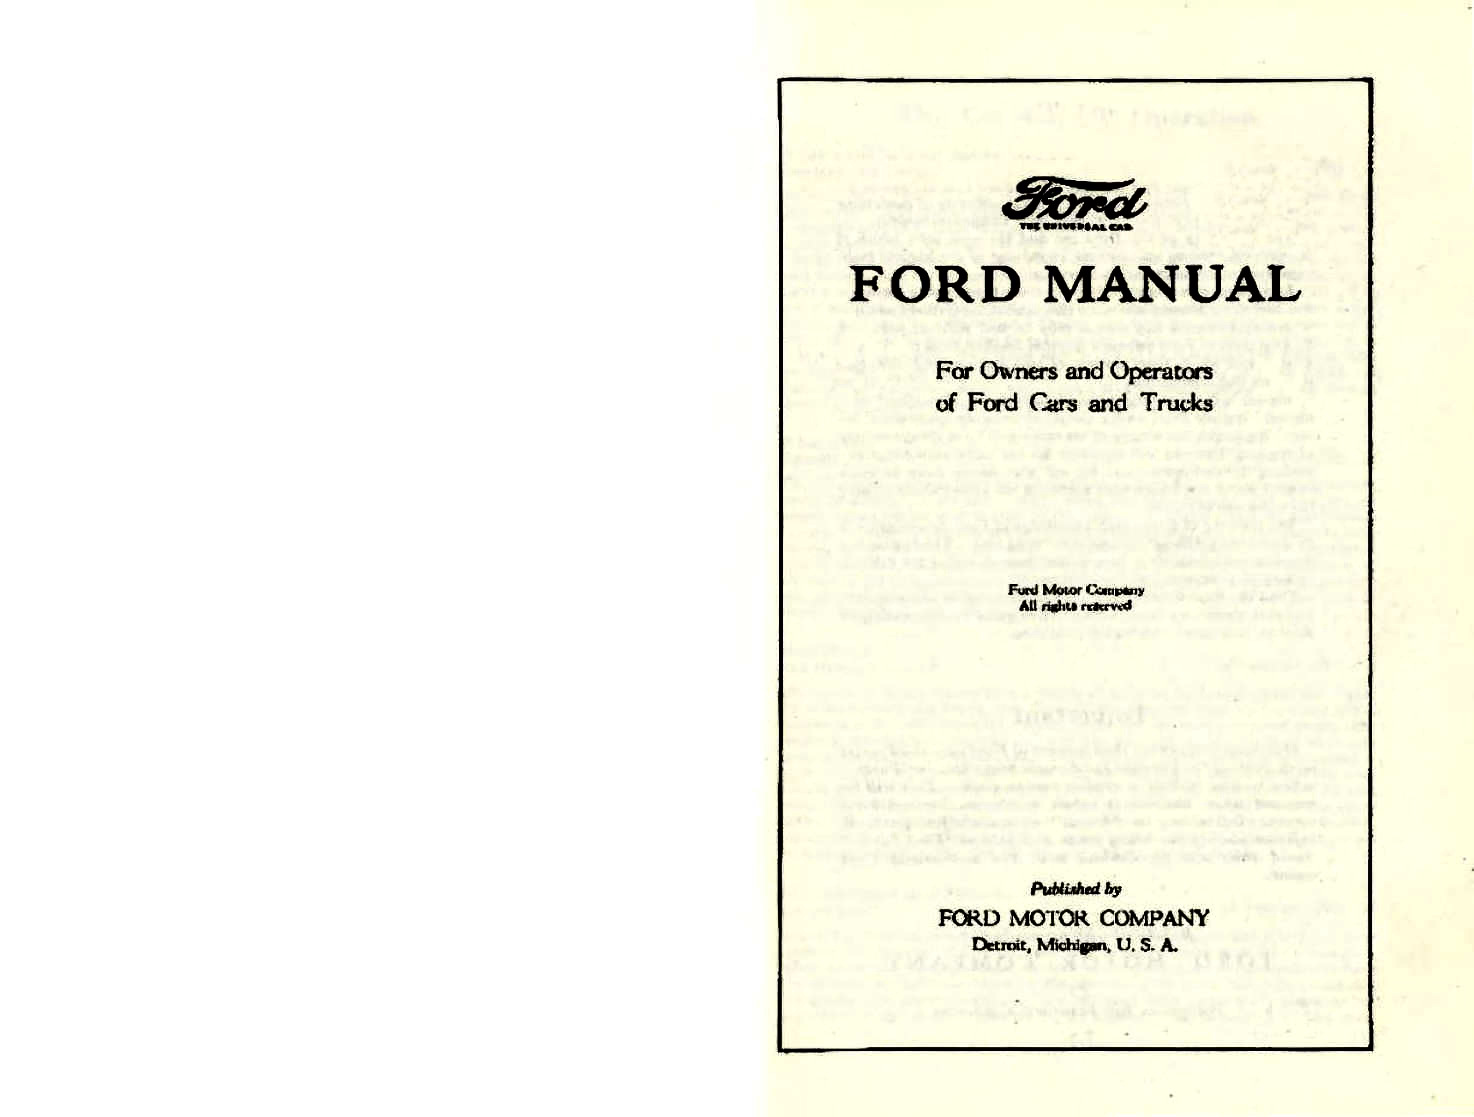 1924_Ford_Owners_Manual-00a-01